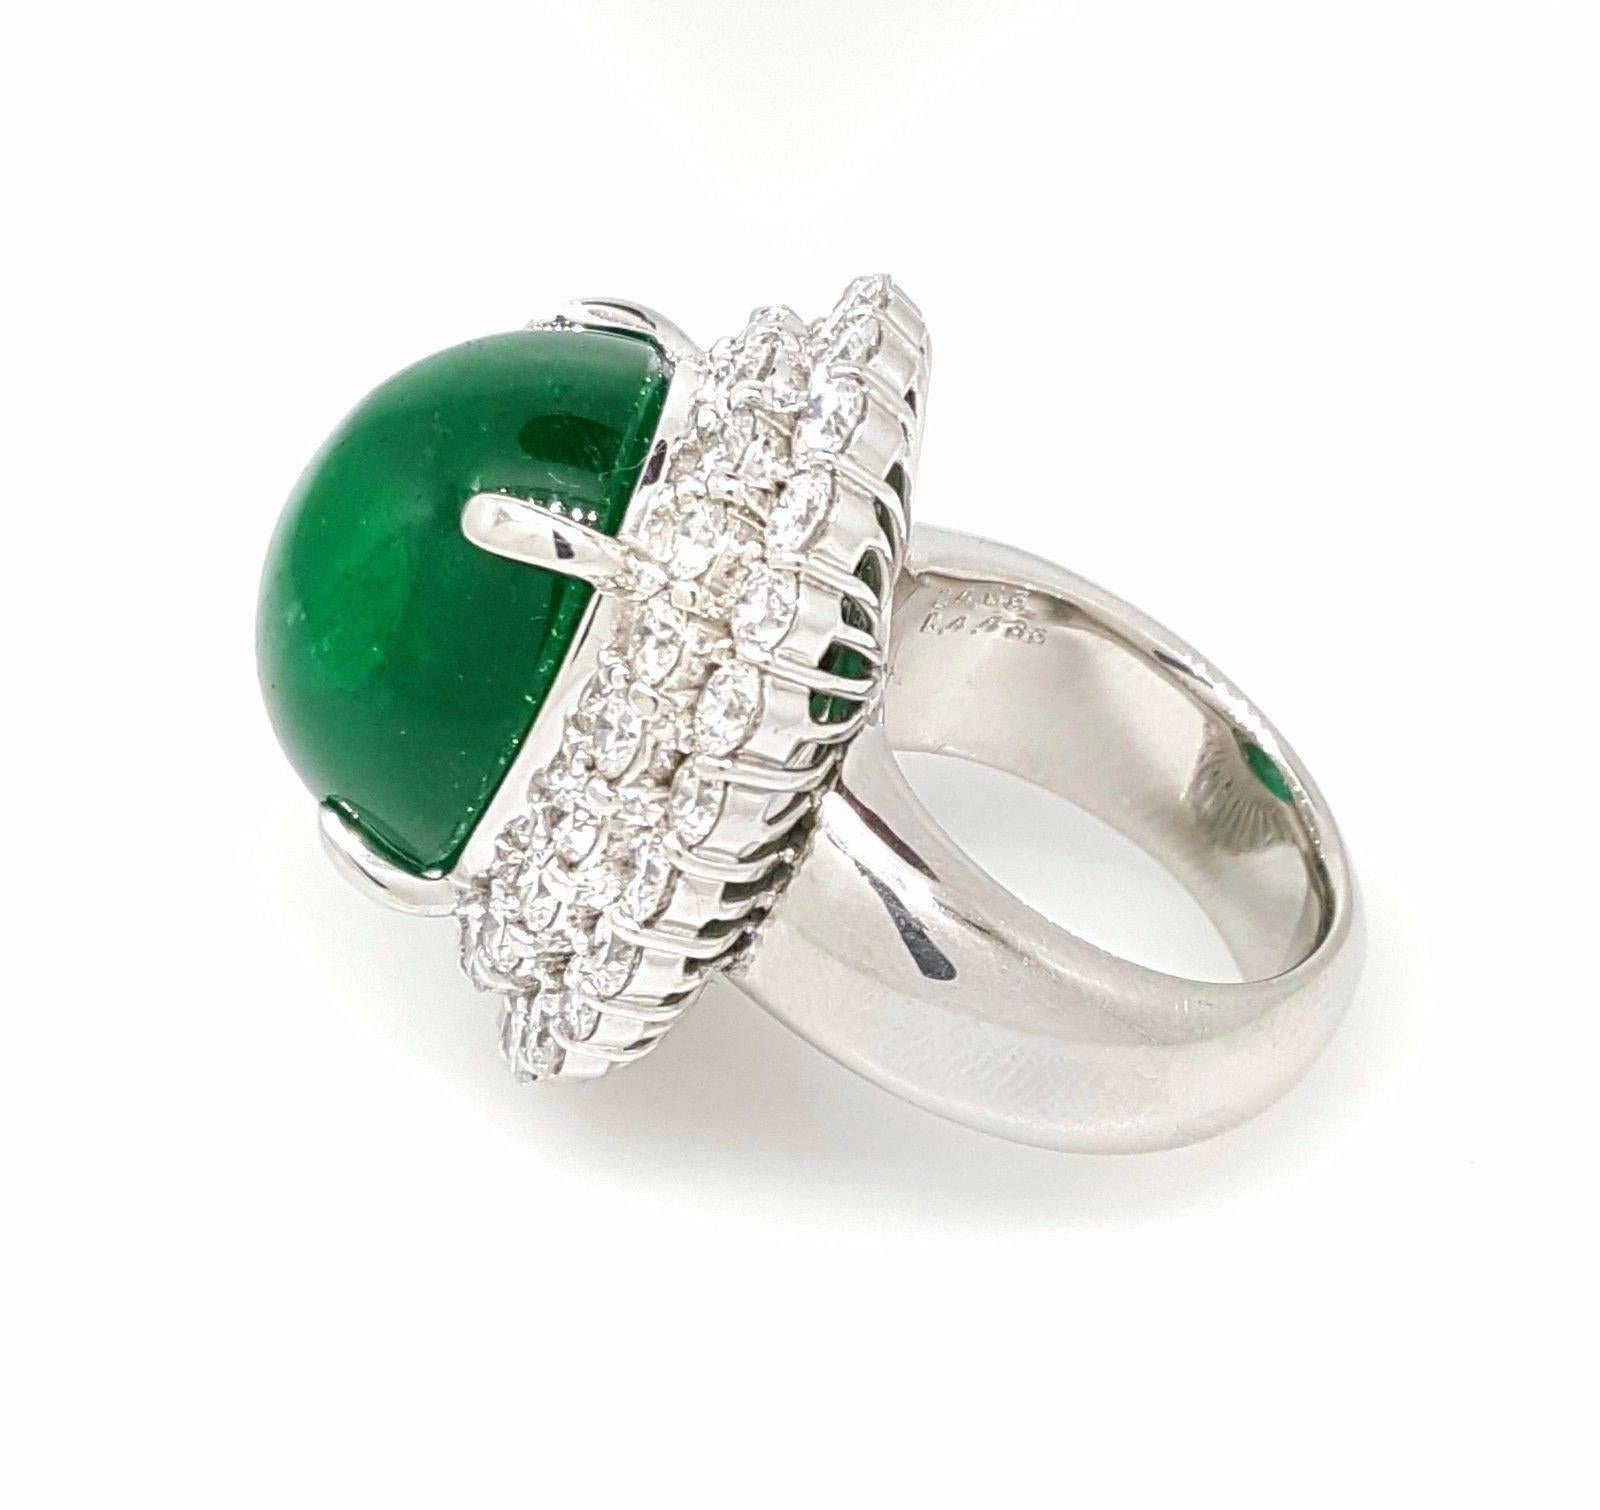 Large emerald cabochon surrounded by two rows of round brilliant diamonds in platinum. Emerald cabochon weighs 24.35 carats and is oval shaped with a deep green color. The piece contains 45 round brilliant diamonds, weighing 4.43 carats. The clarity